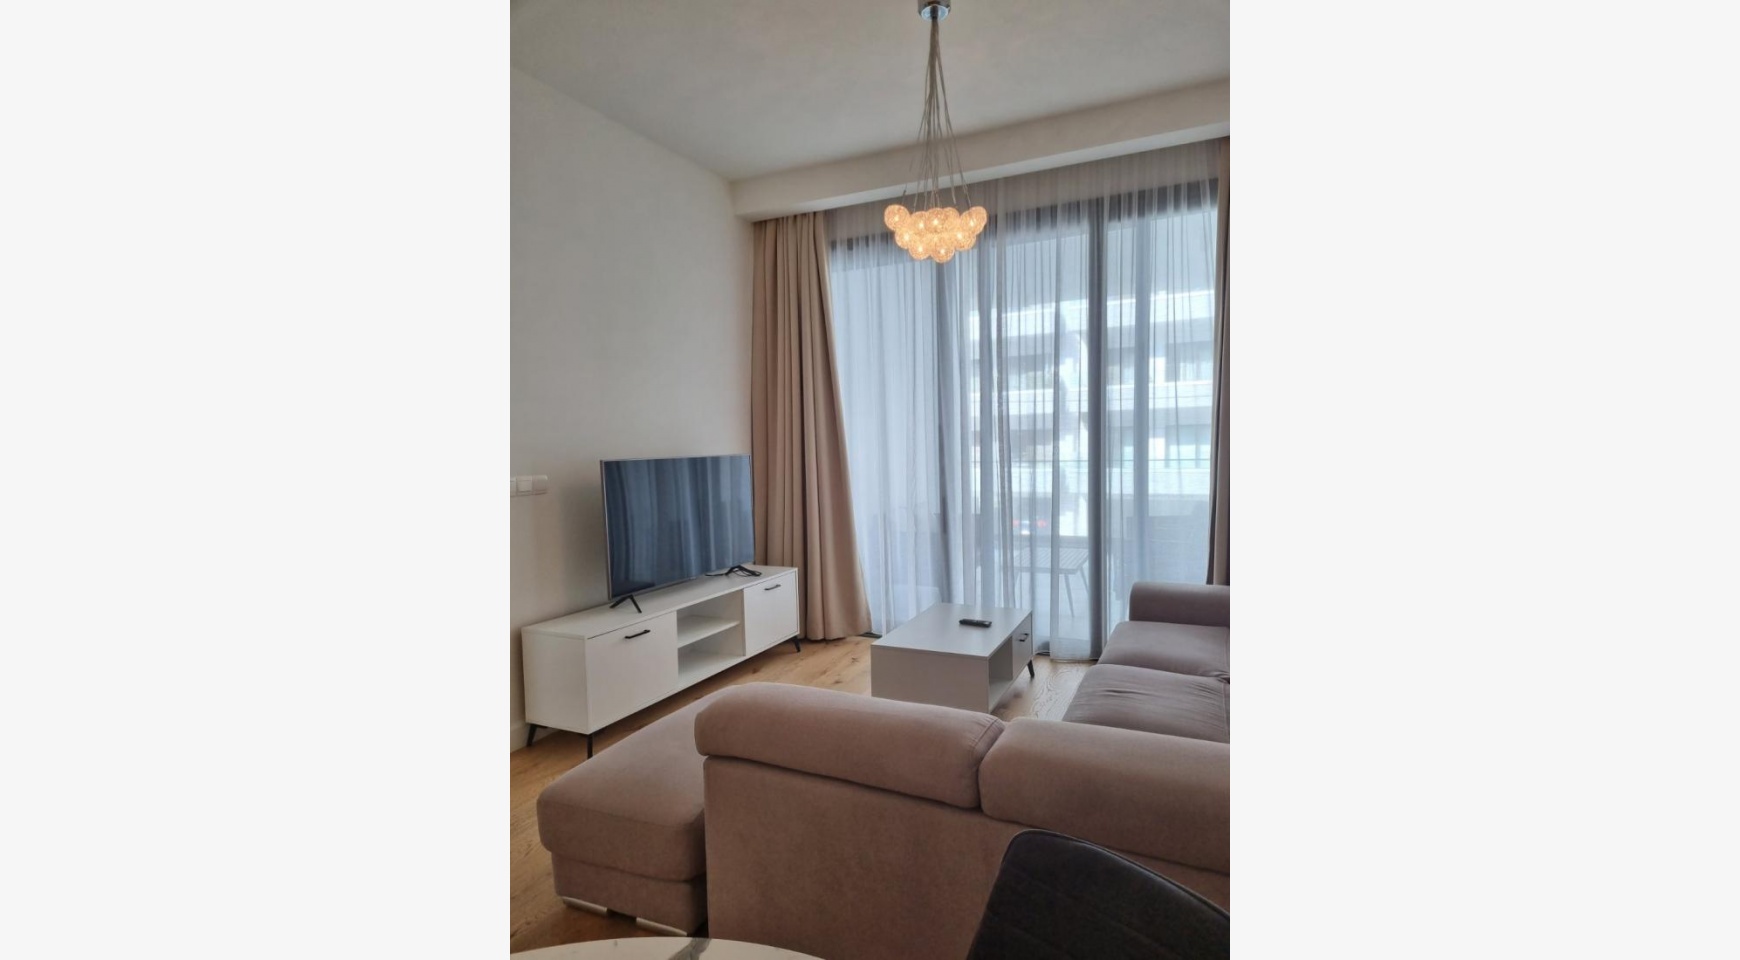 Hortensia Residence, Apt. 101. 2 Bedroom Apartment  in a New Complex near the Sea - 26